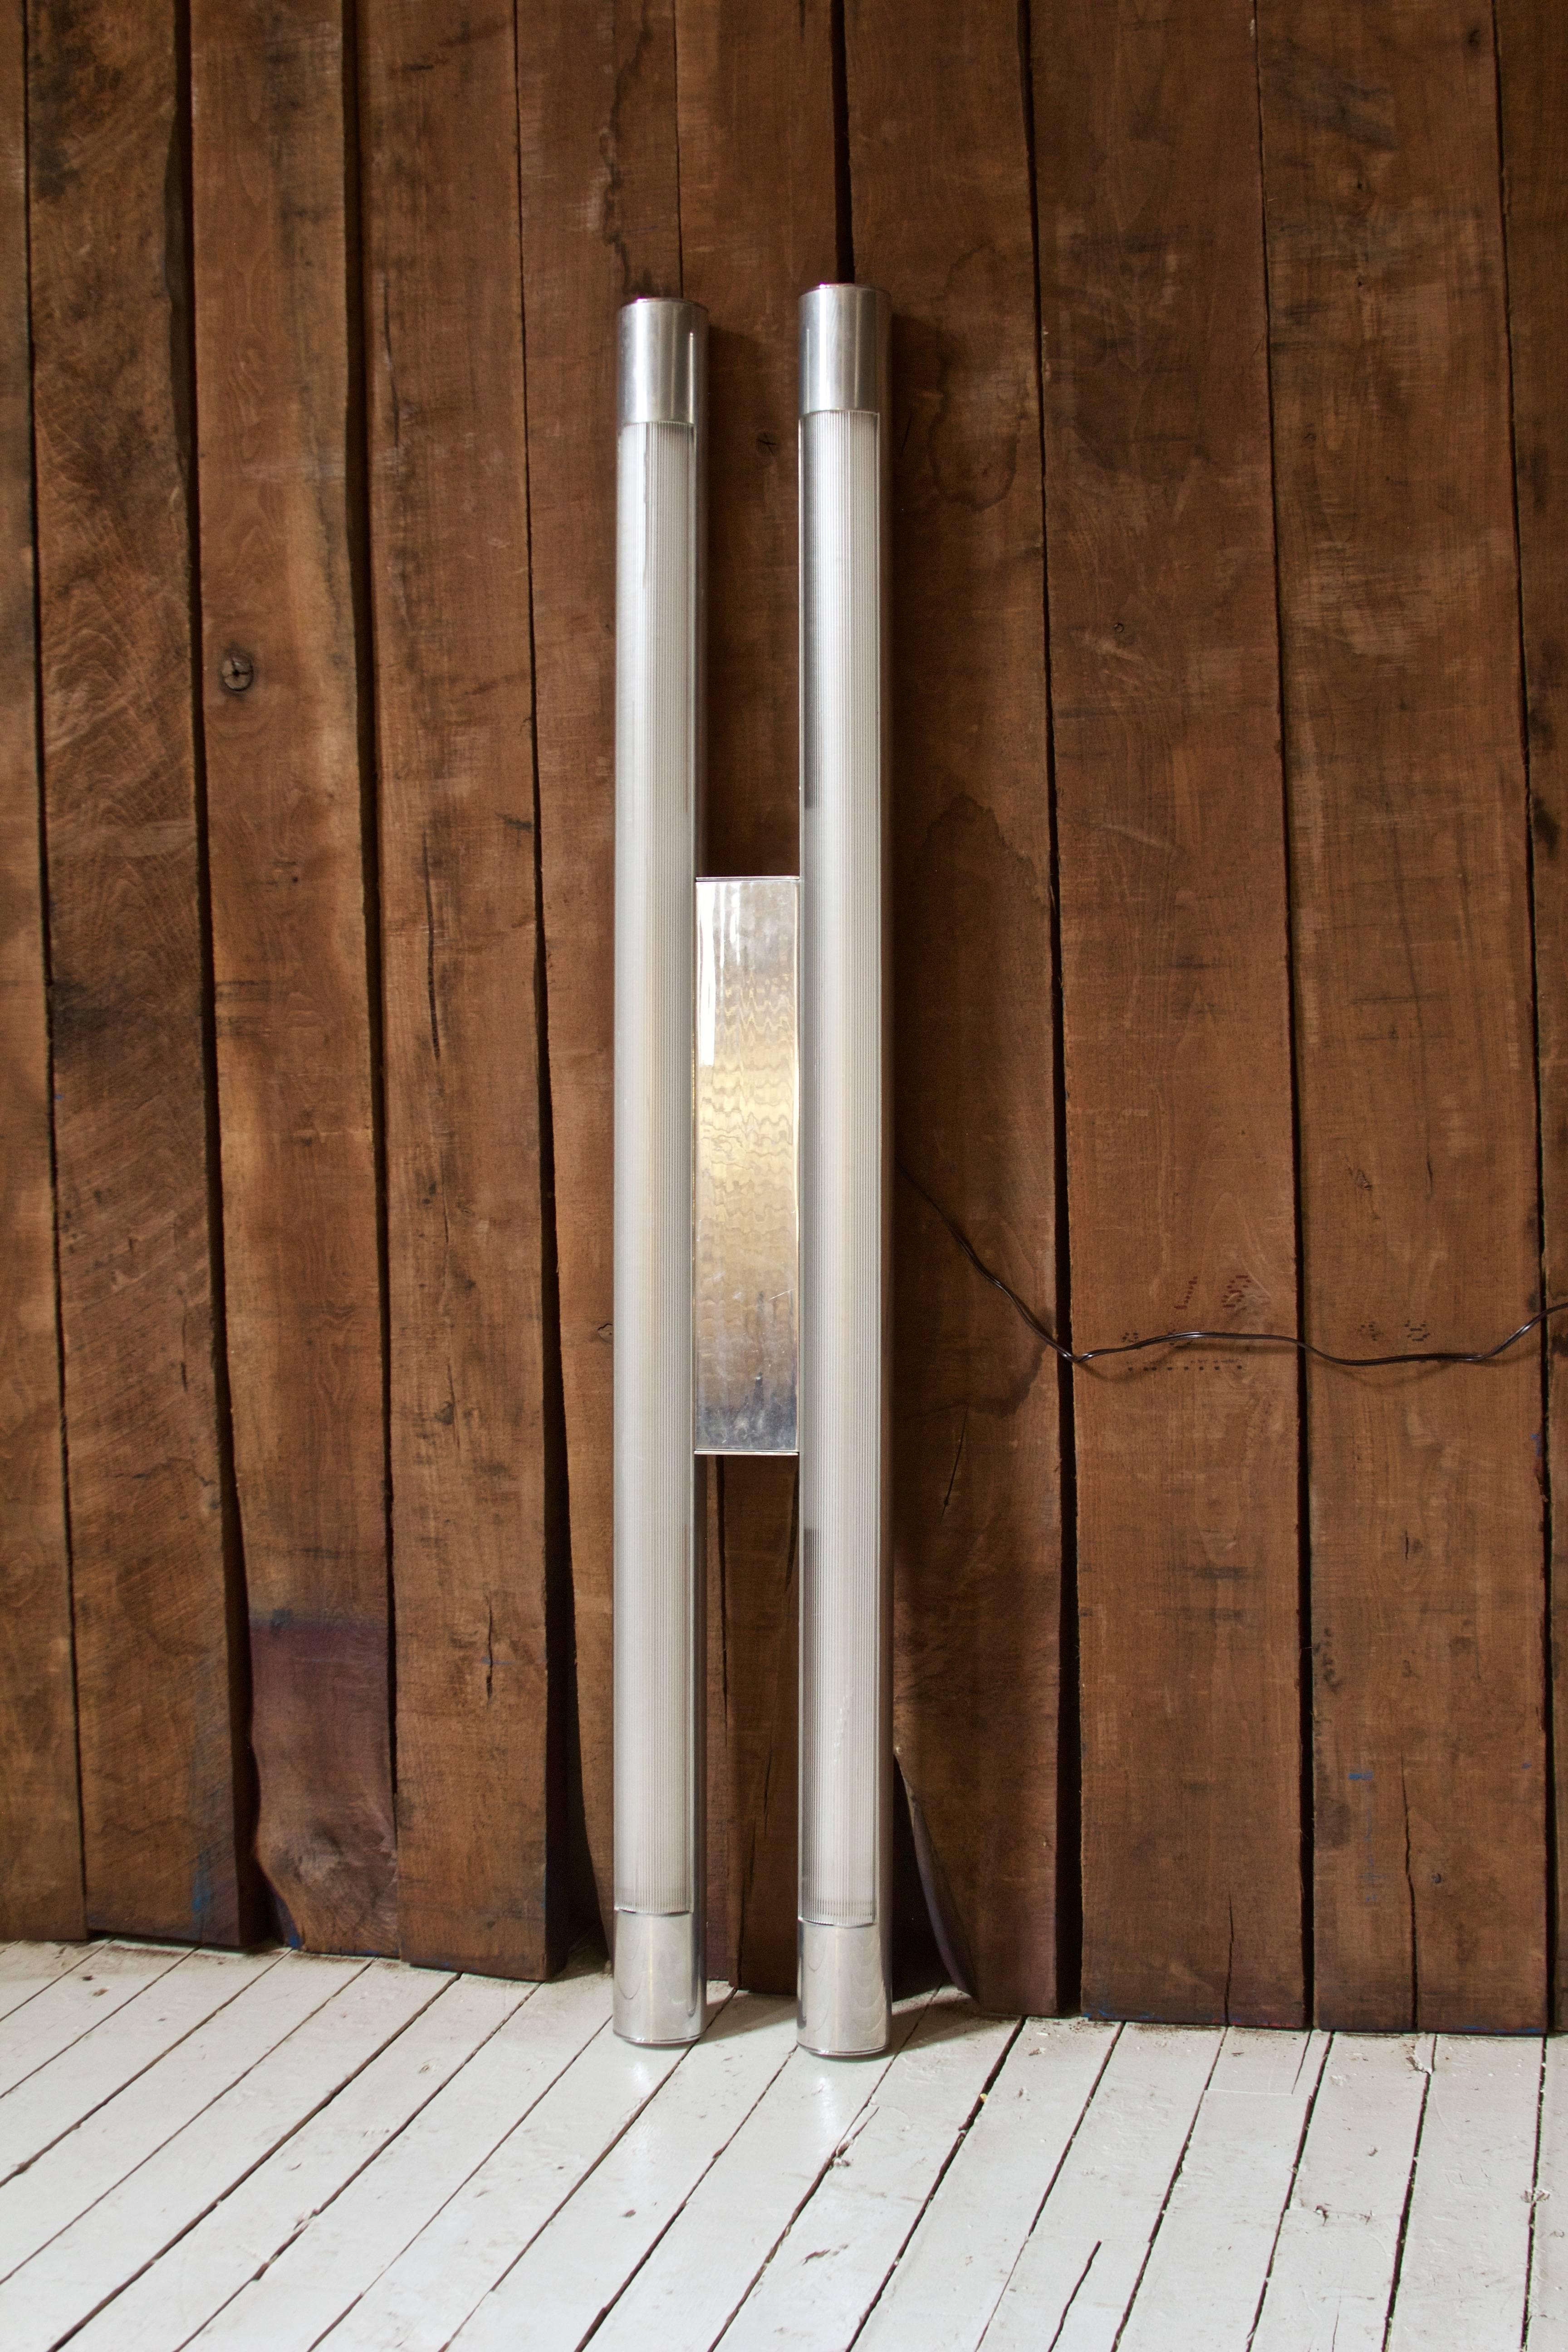 Unique and impressive aluminum light by Paul Mayen for Habitat International, circa 1968. This well proportioned design consists of two polished aluminum cylindrical sections joined midway by polished aluminum rectangular panel; each section houses